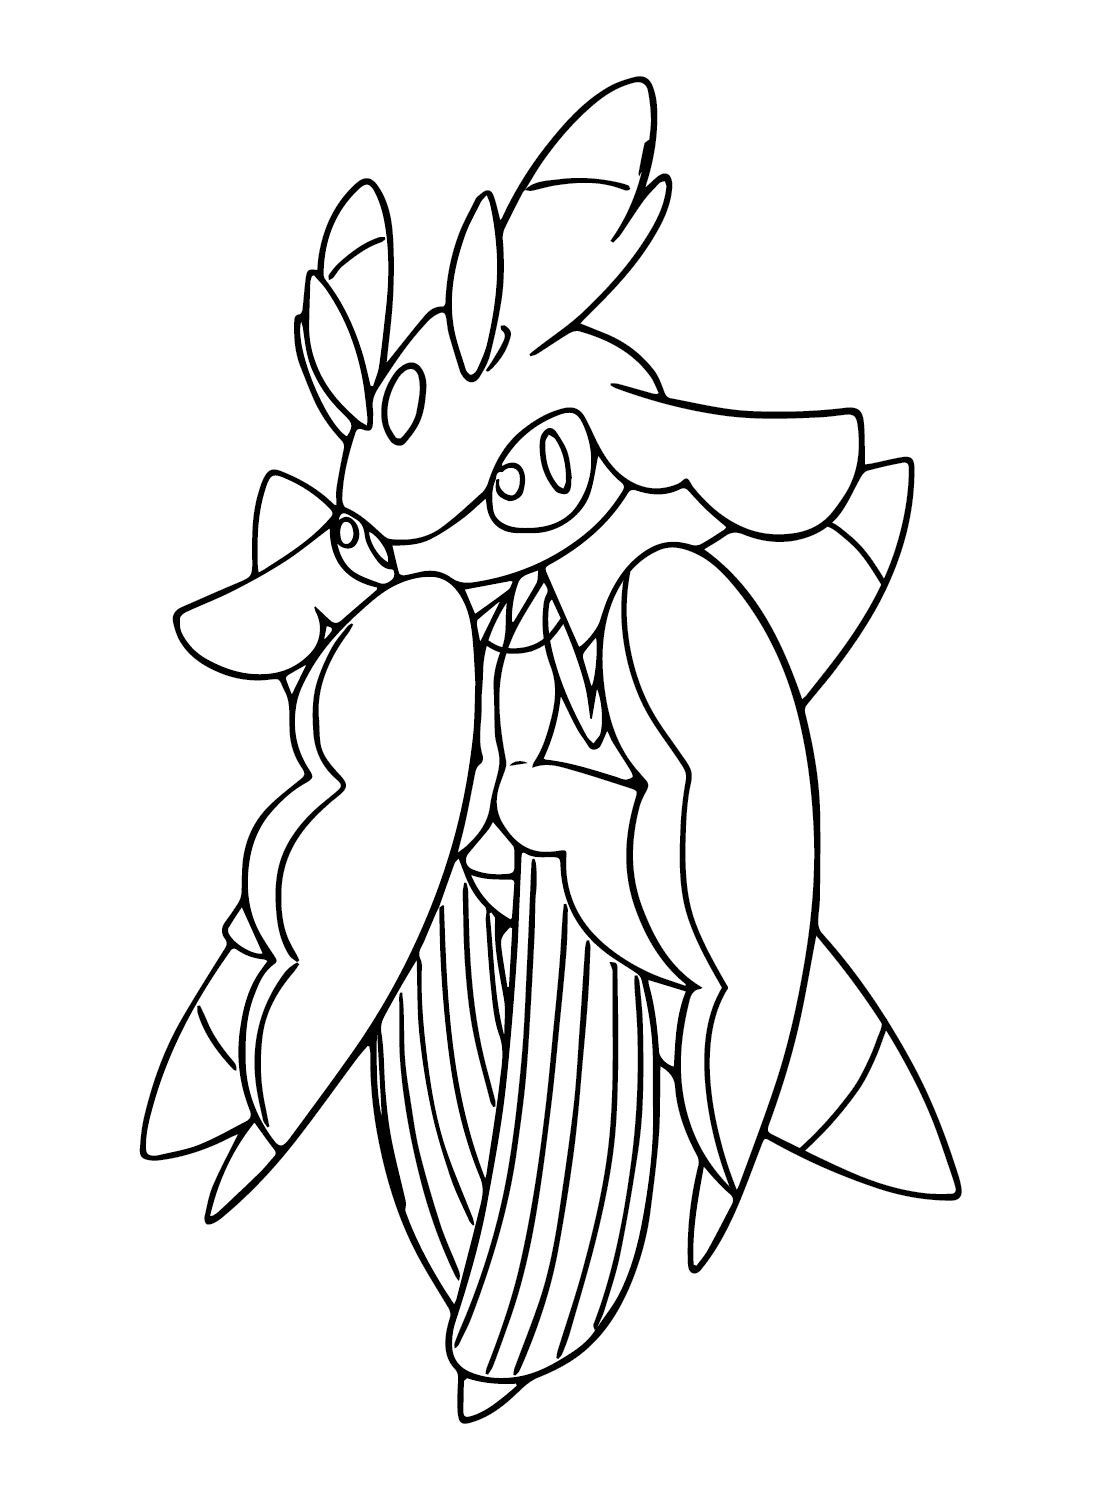 Lurantis to Color Coloring Page